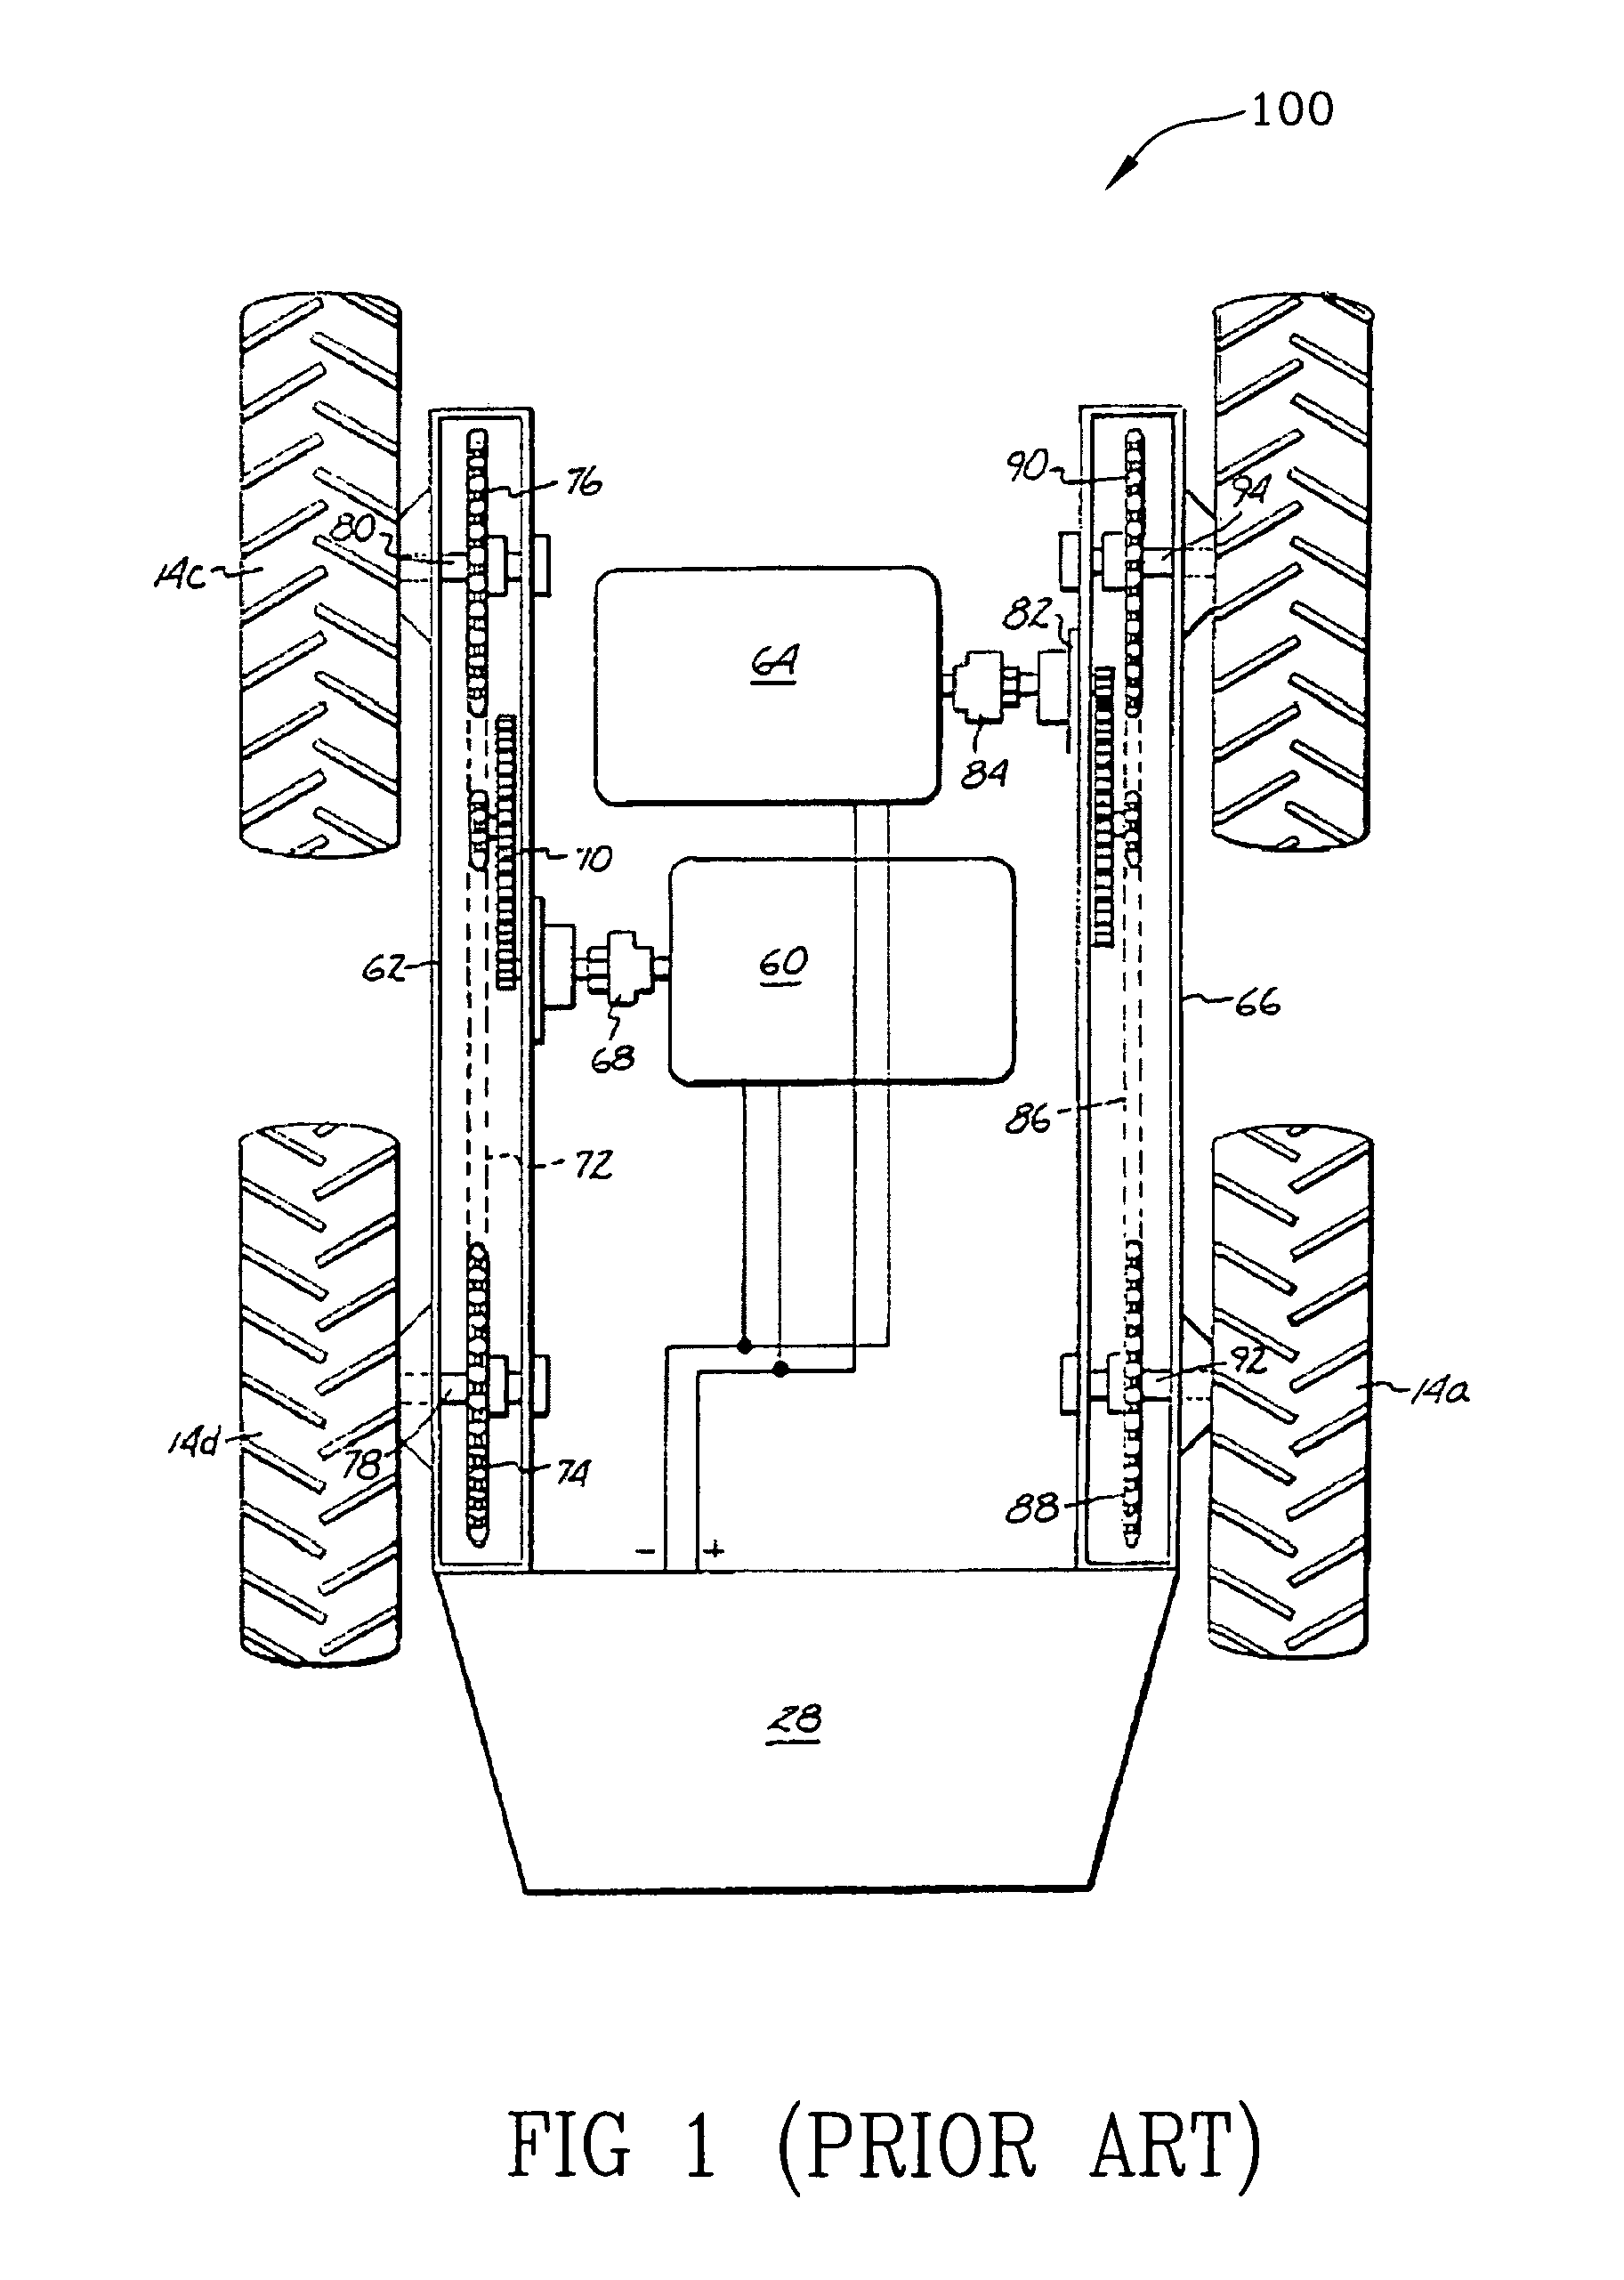 Lubrication system for right-angle drives used with utility vehicles